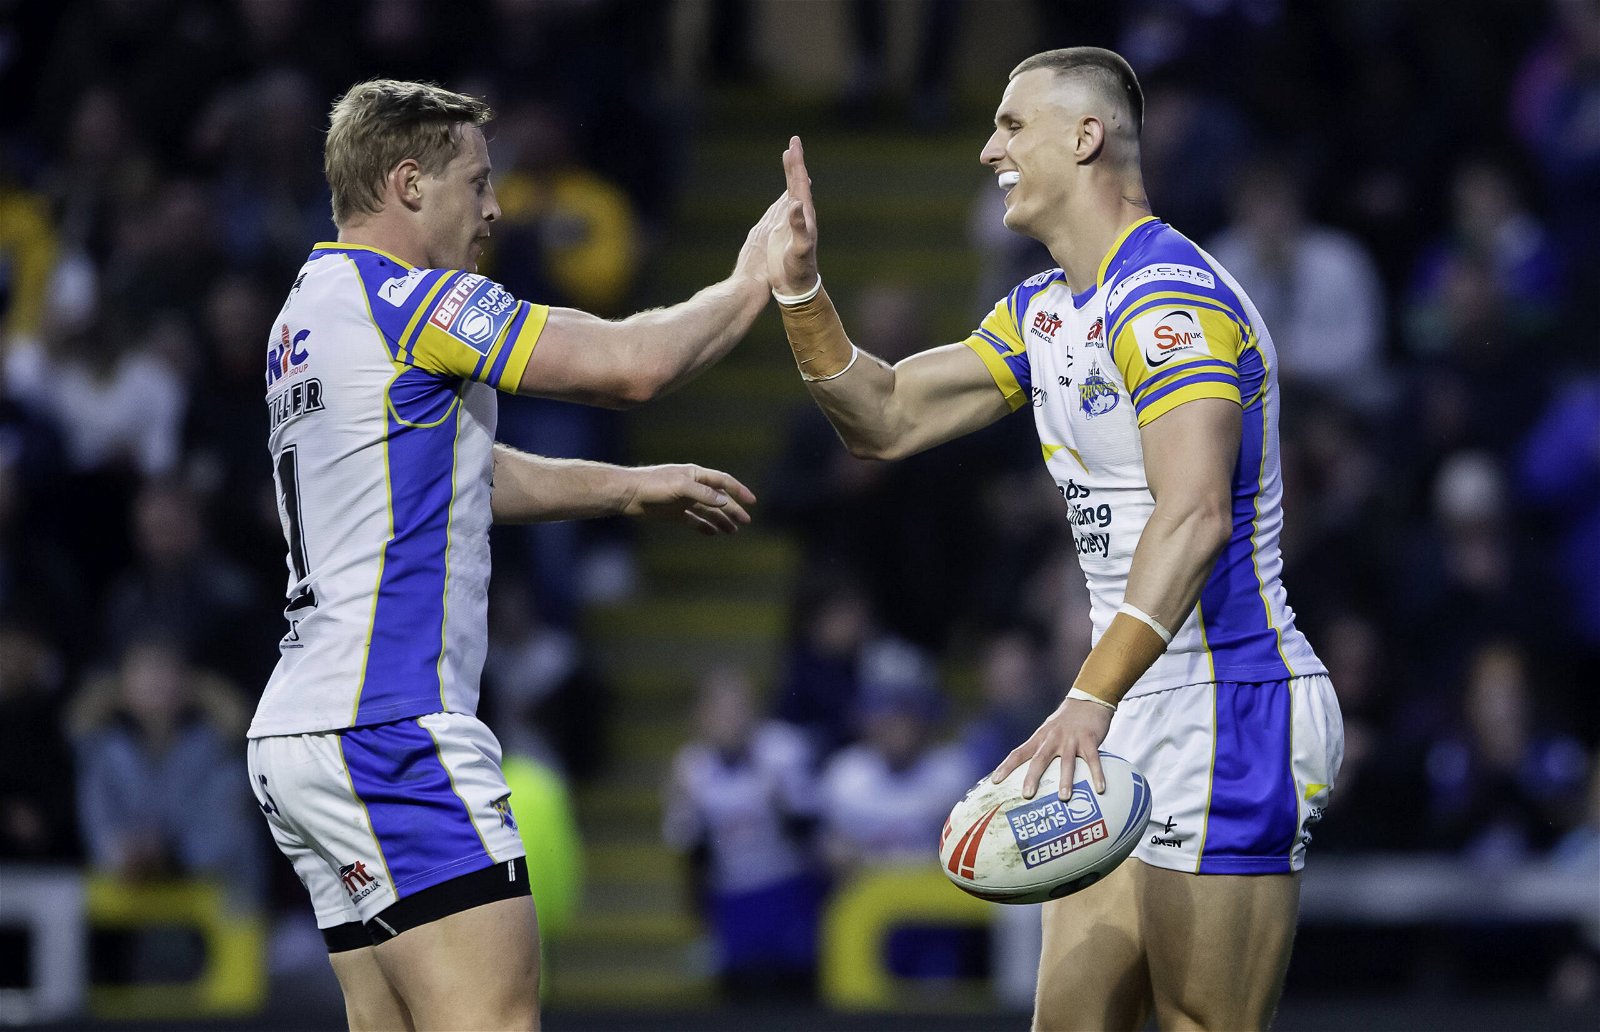 Leeds Rhinos players Lachie Miller and Ash Handley-Credit: IMAGO